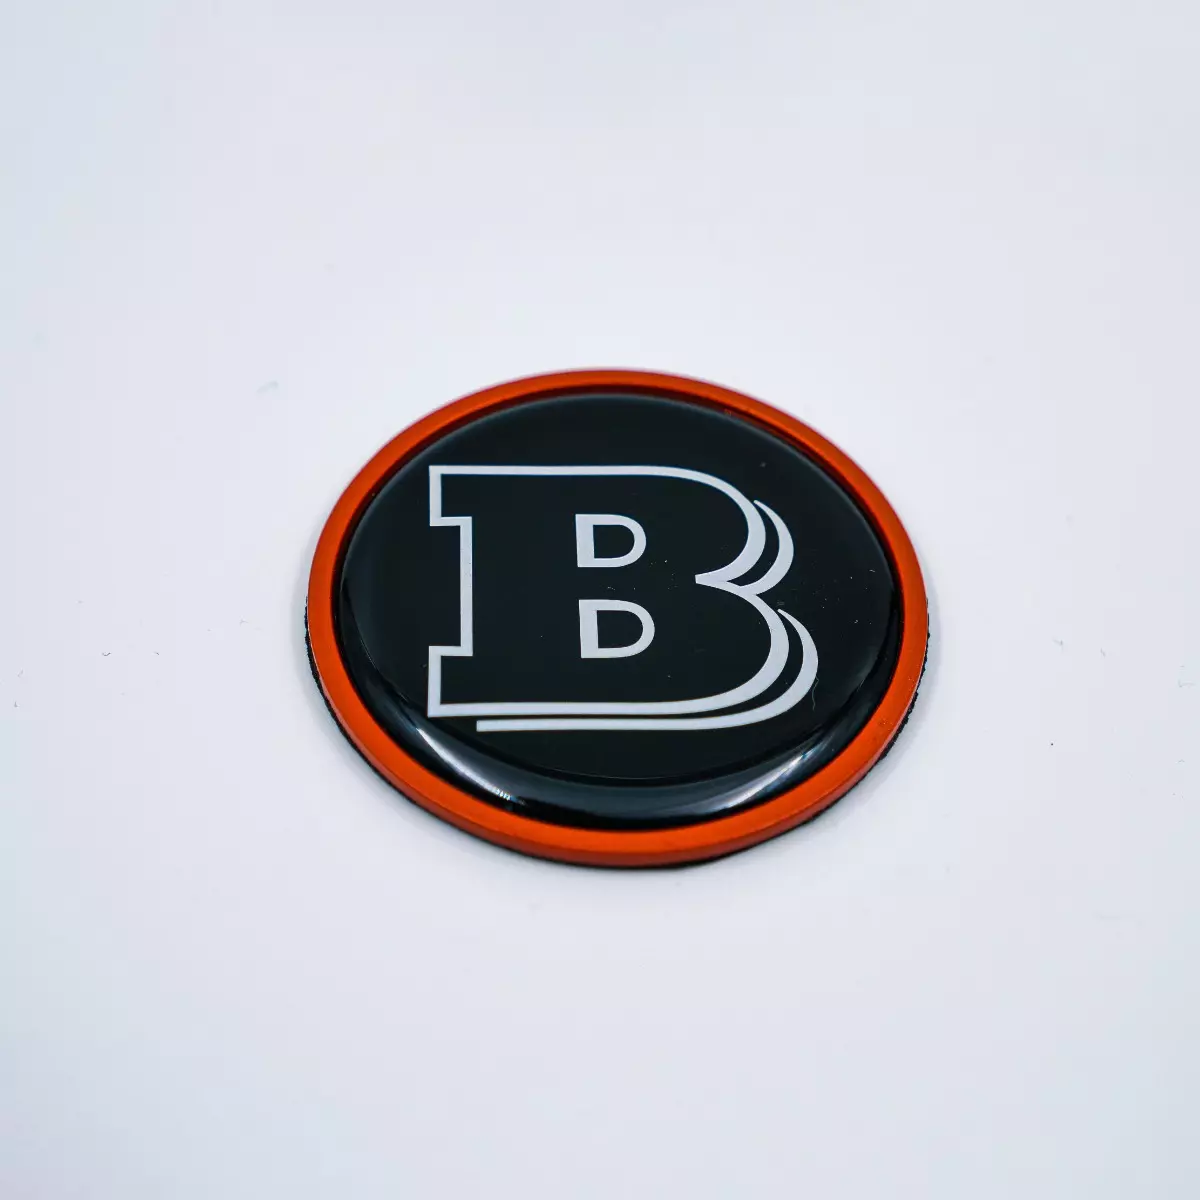 Brabus Hood Badge 55 mm Orange with Black and Gray Logo for Hood Cover W463 W463A G-Class Mercedes-Benz